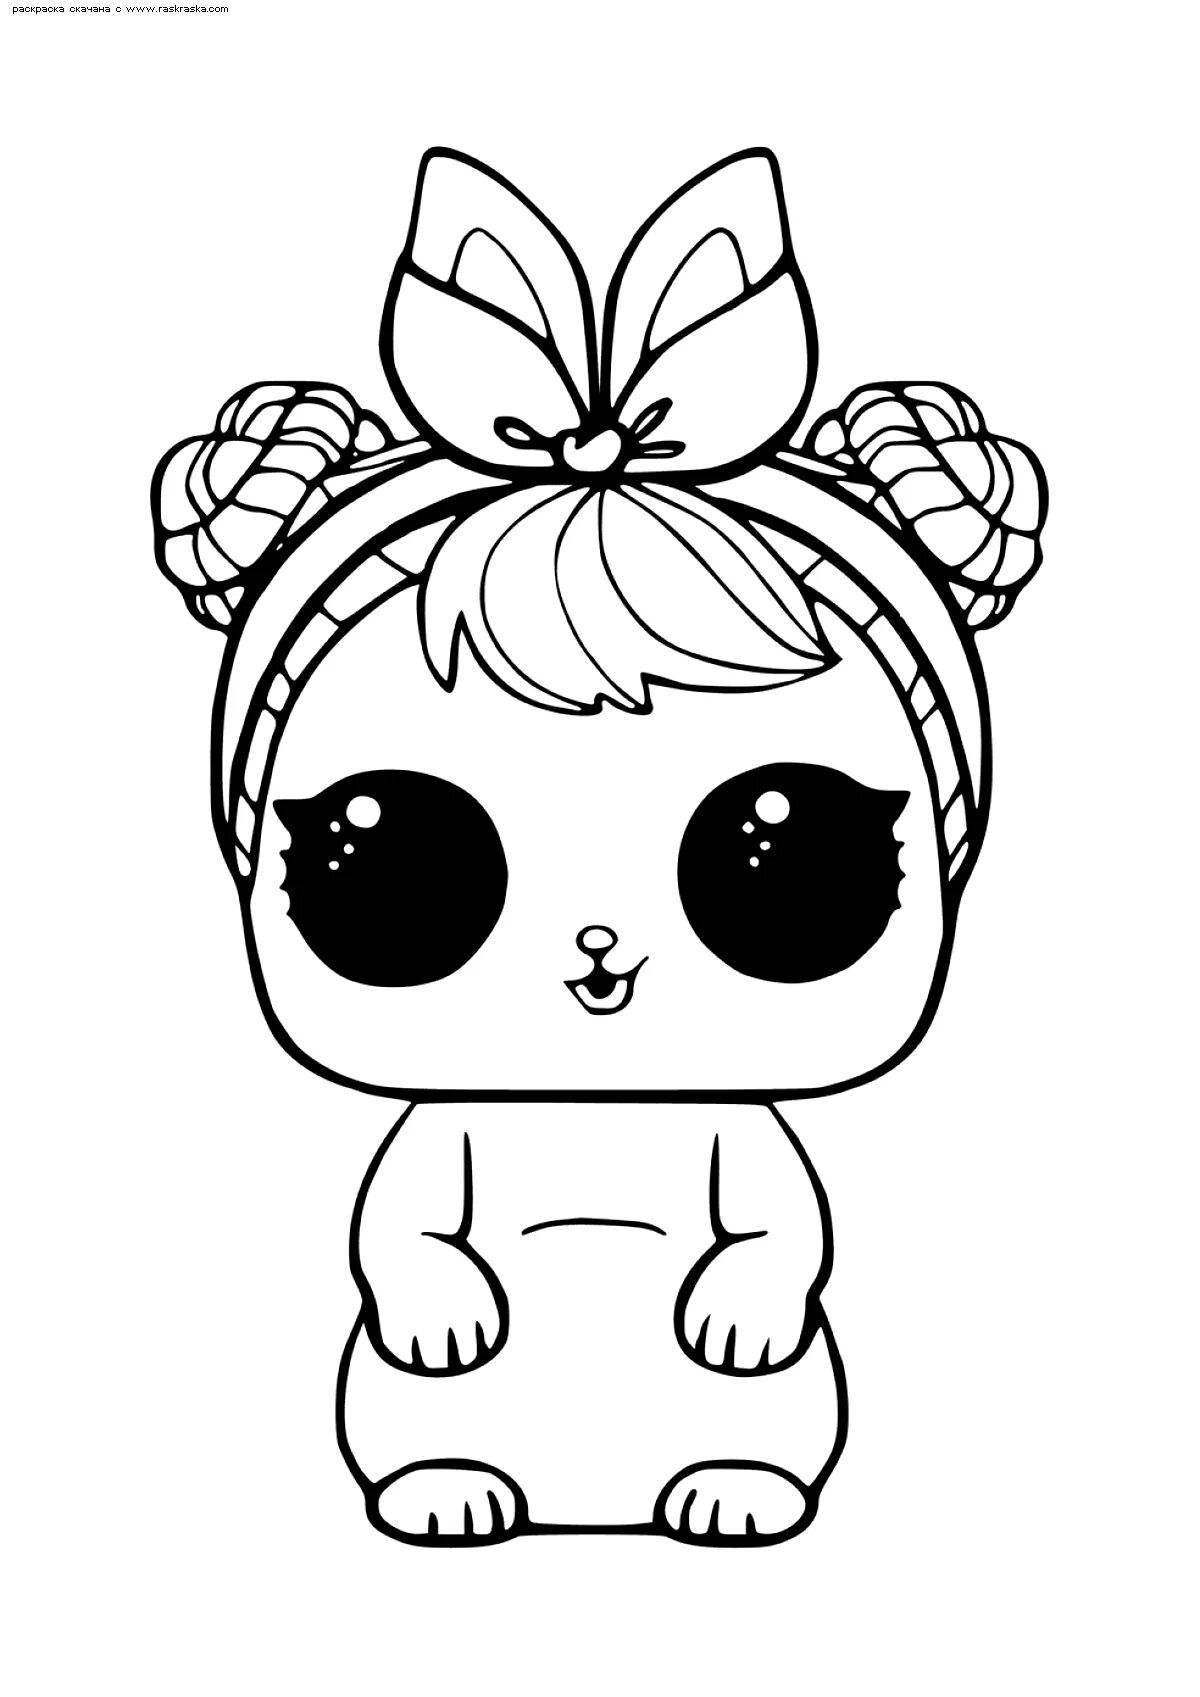 Lol winter doll animated coloring page